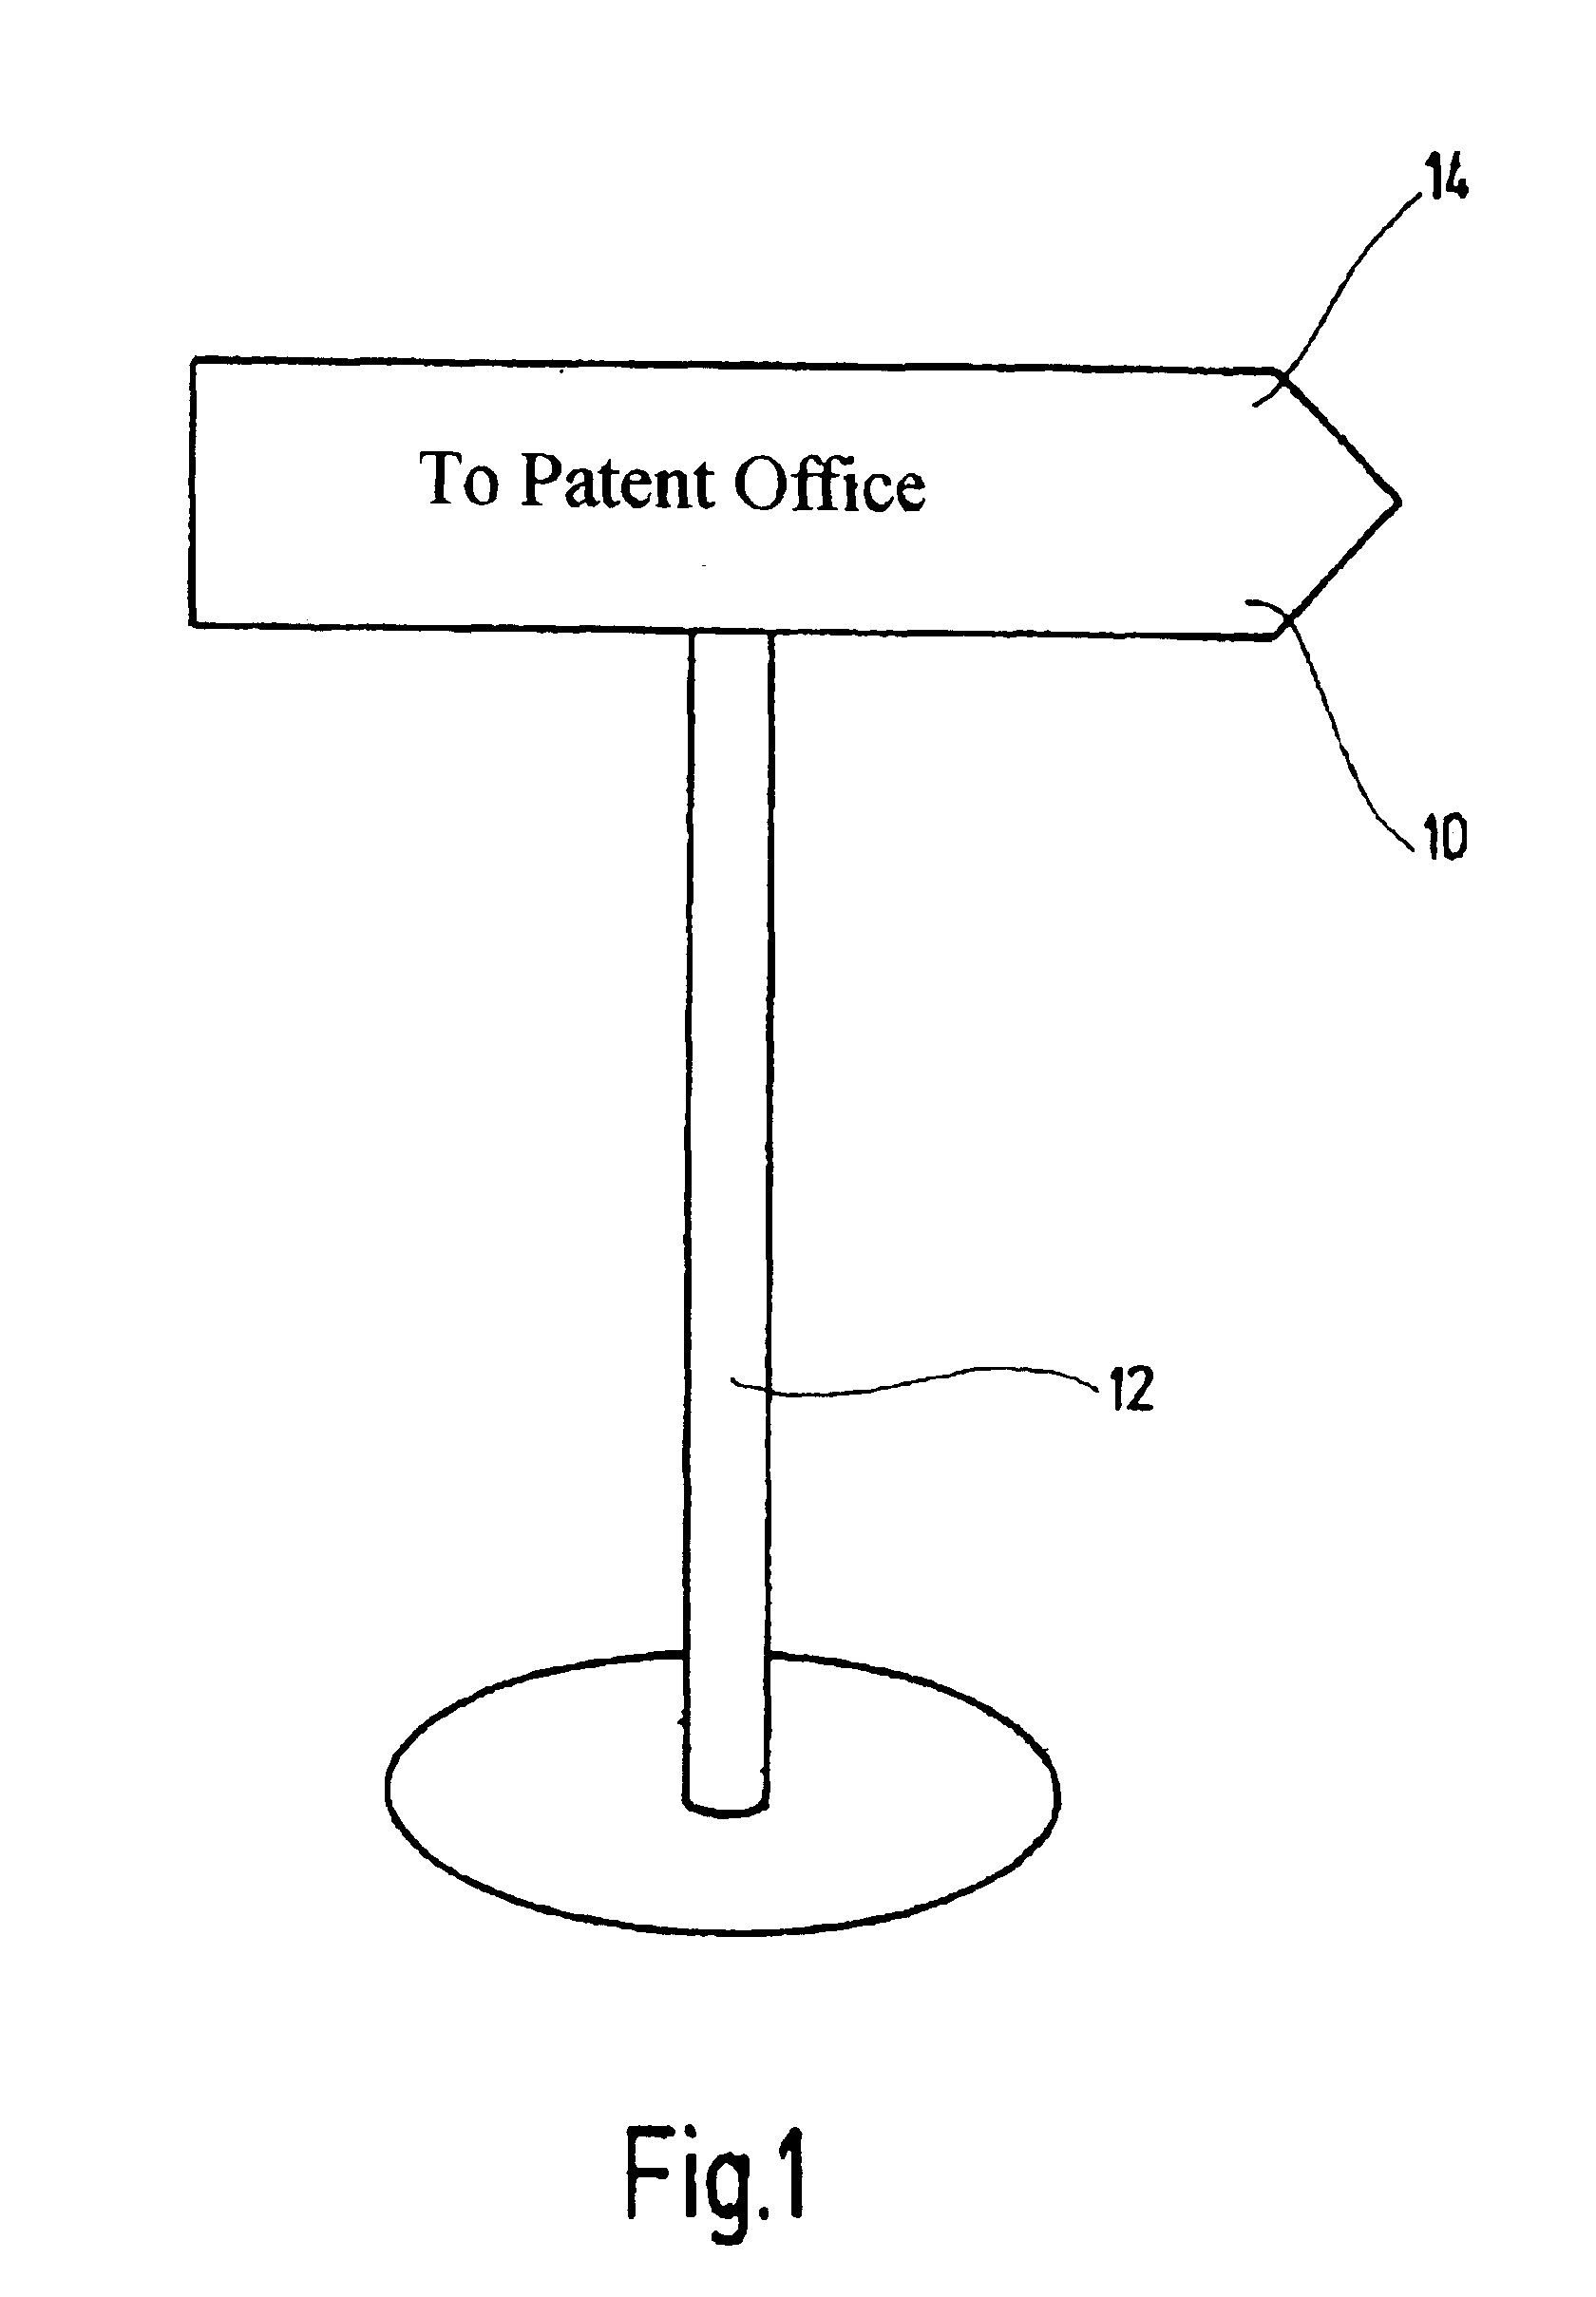 Self-cleaning display device